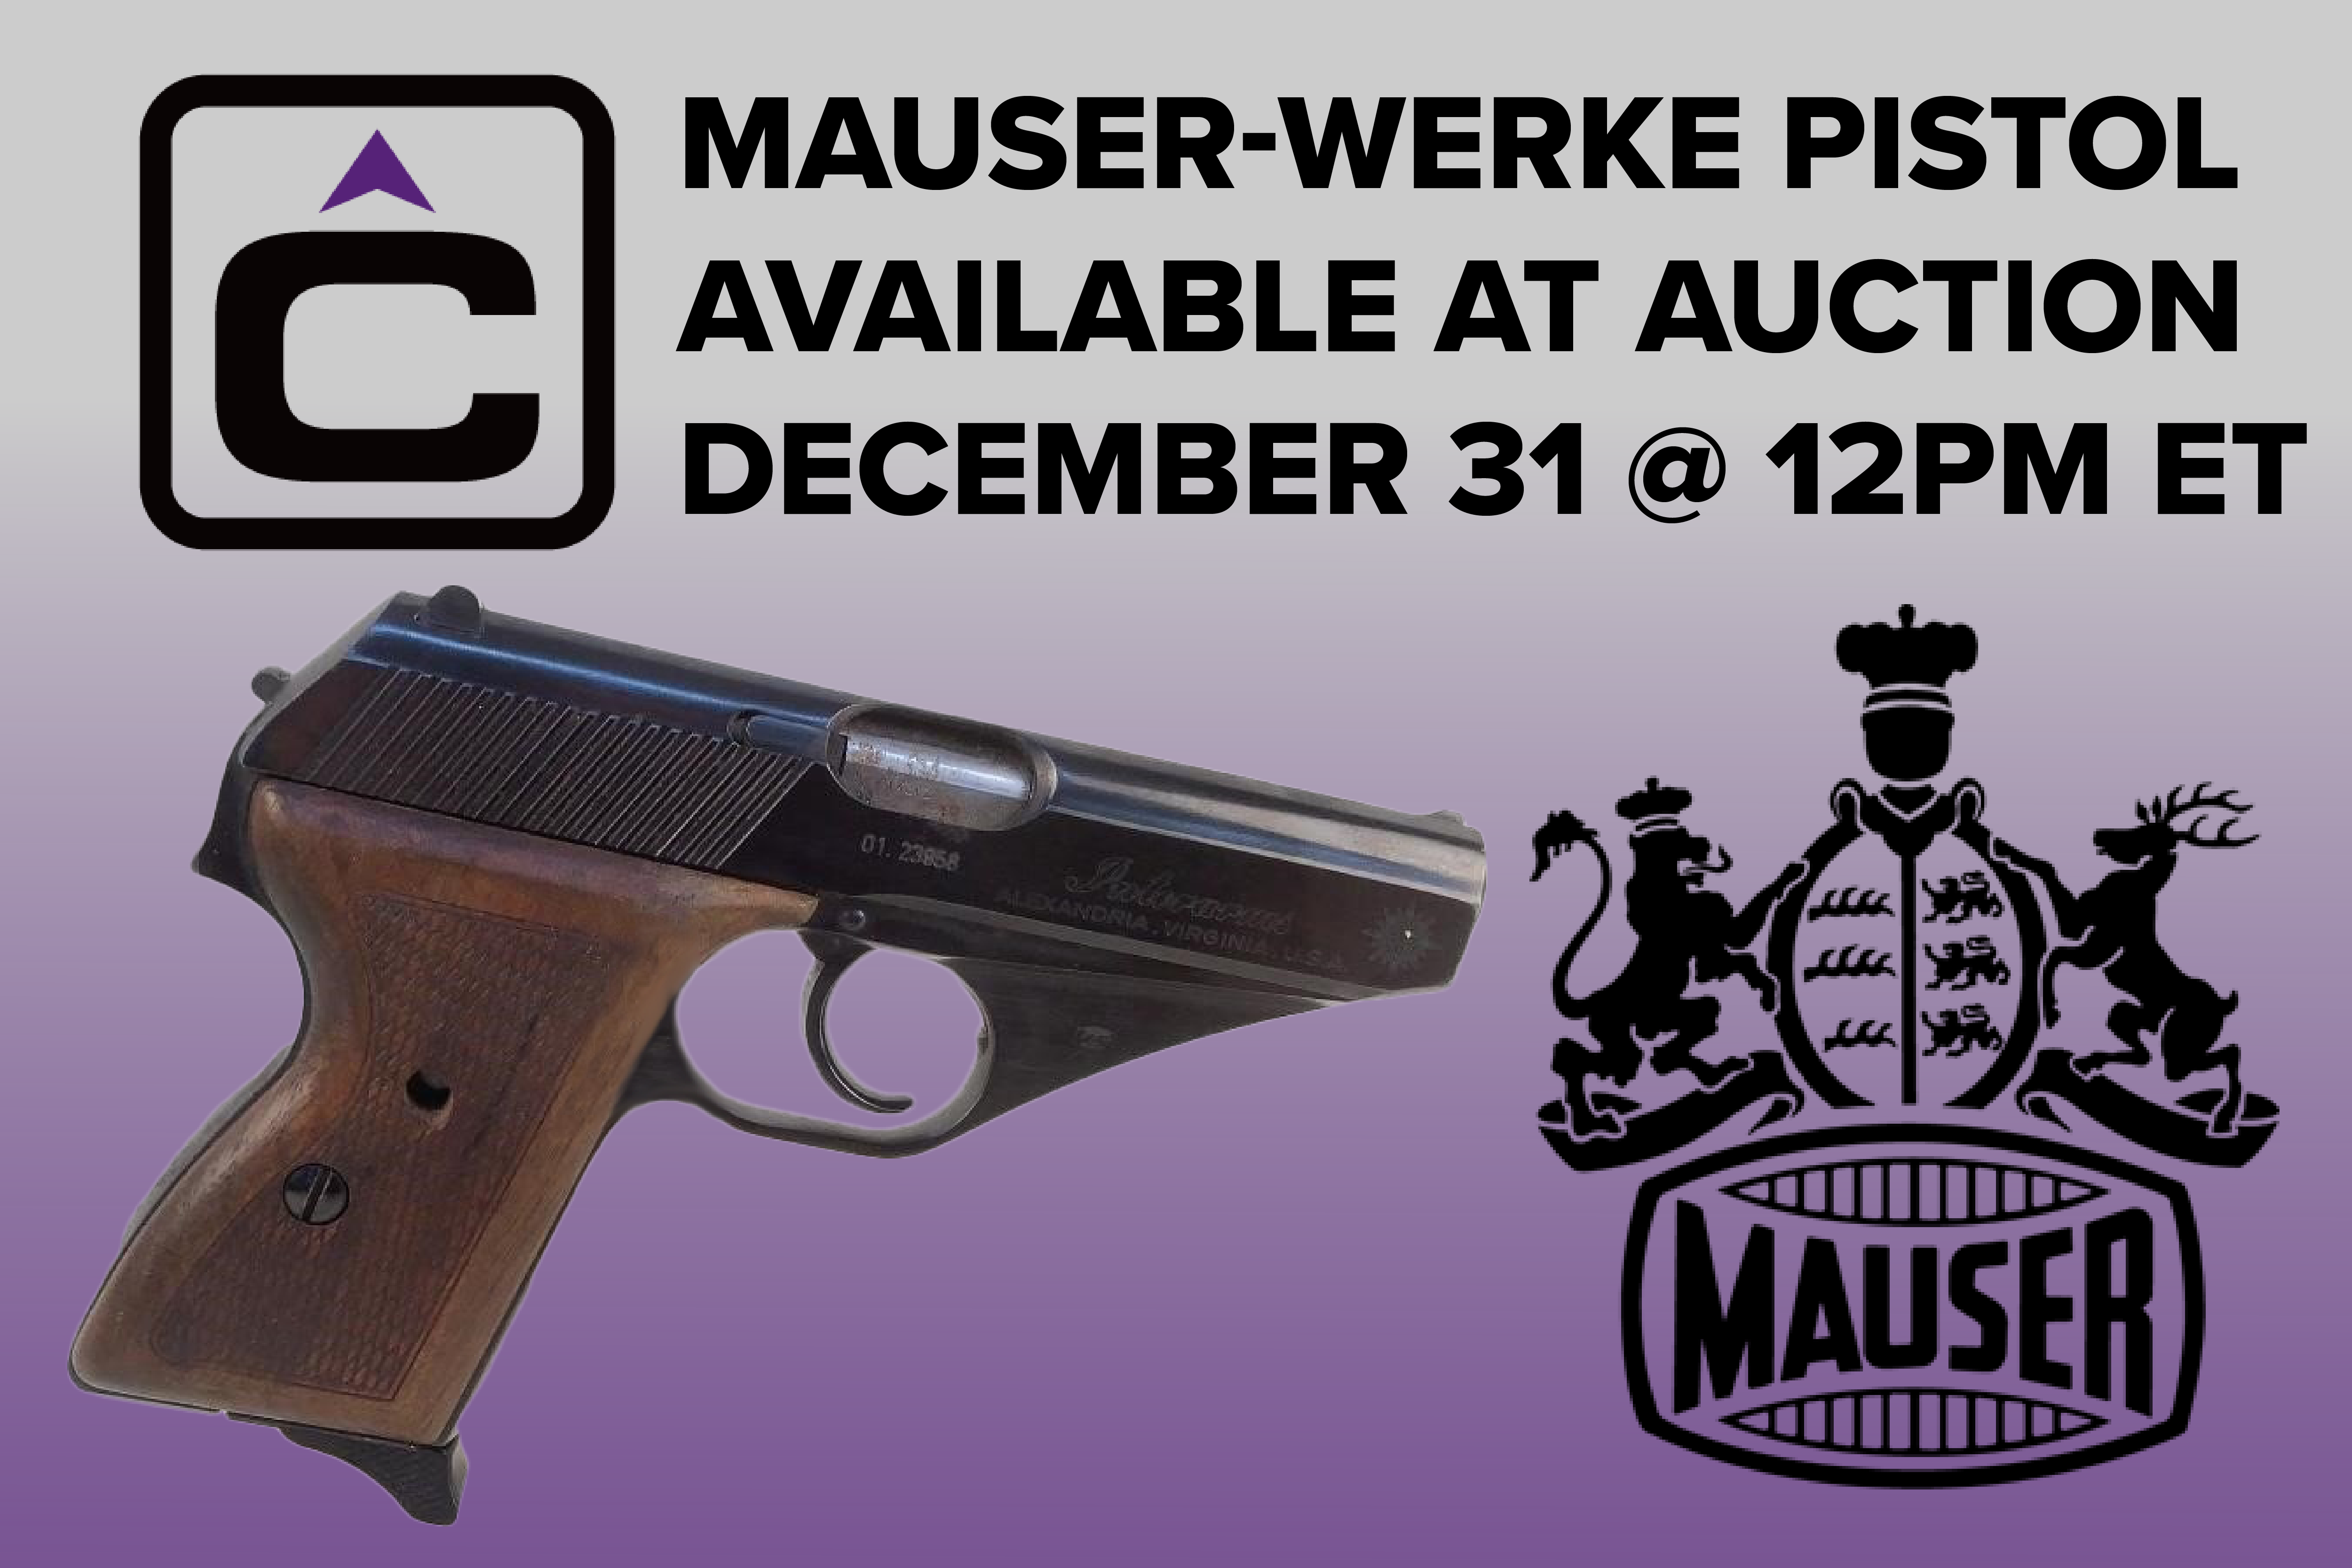 Mauser at Auction